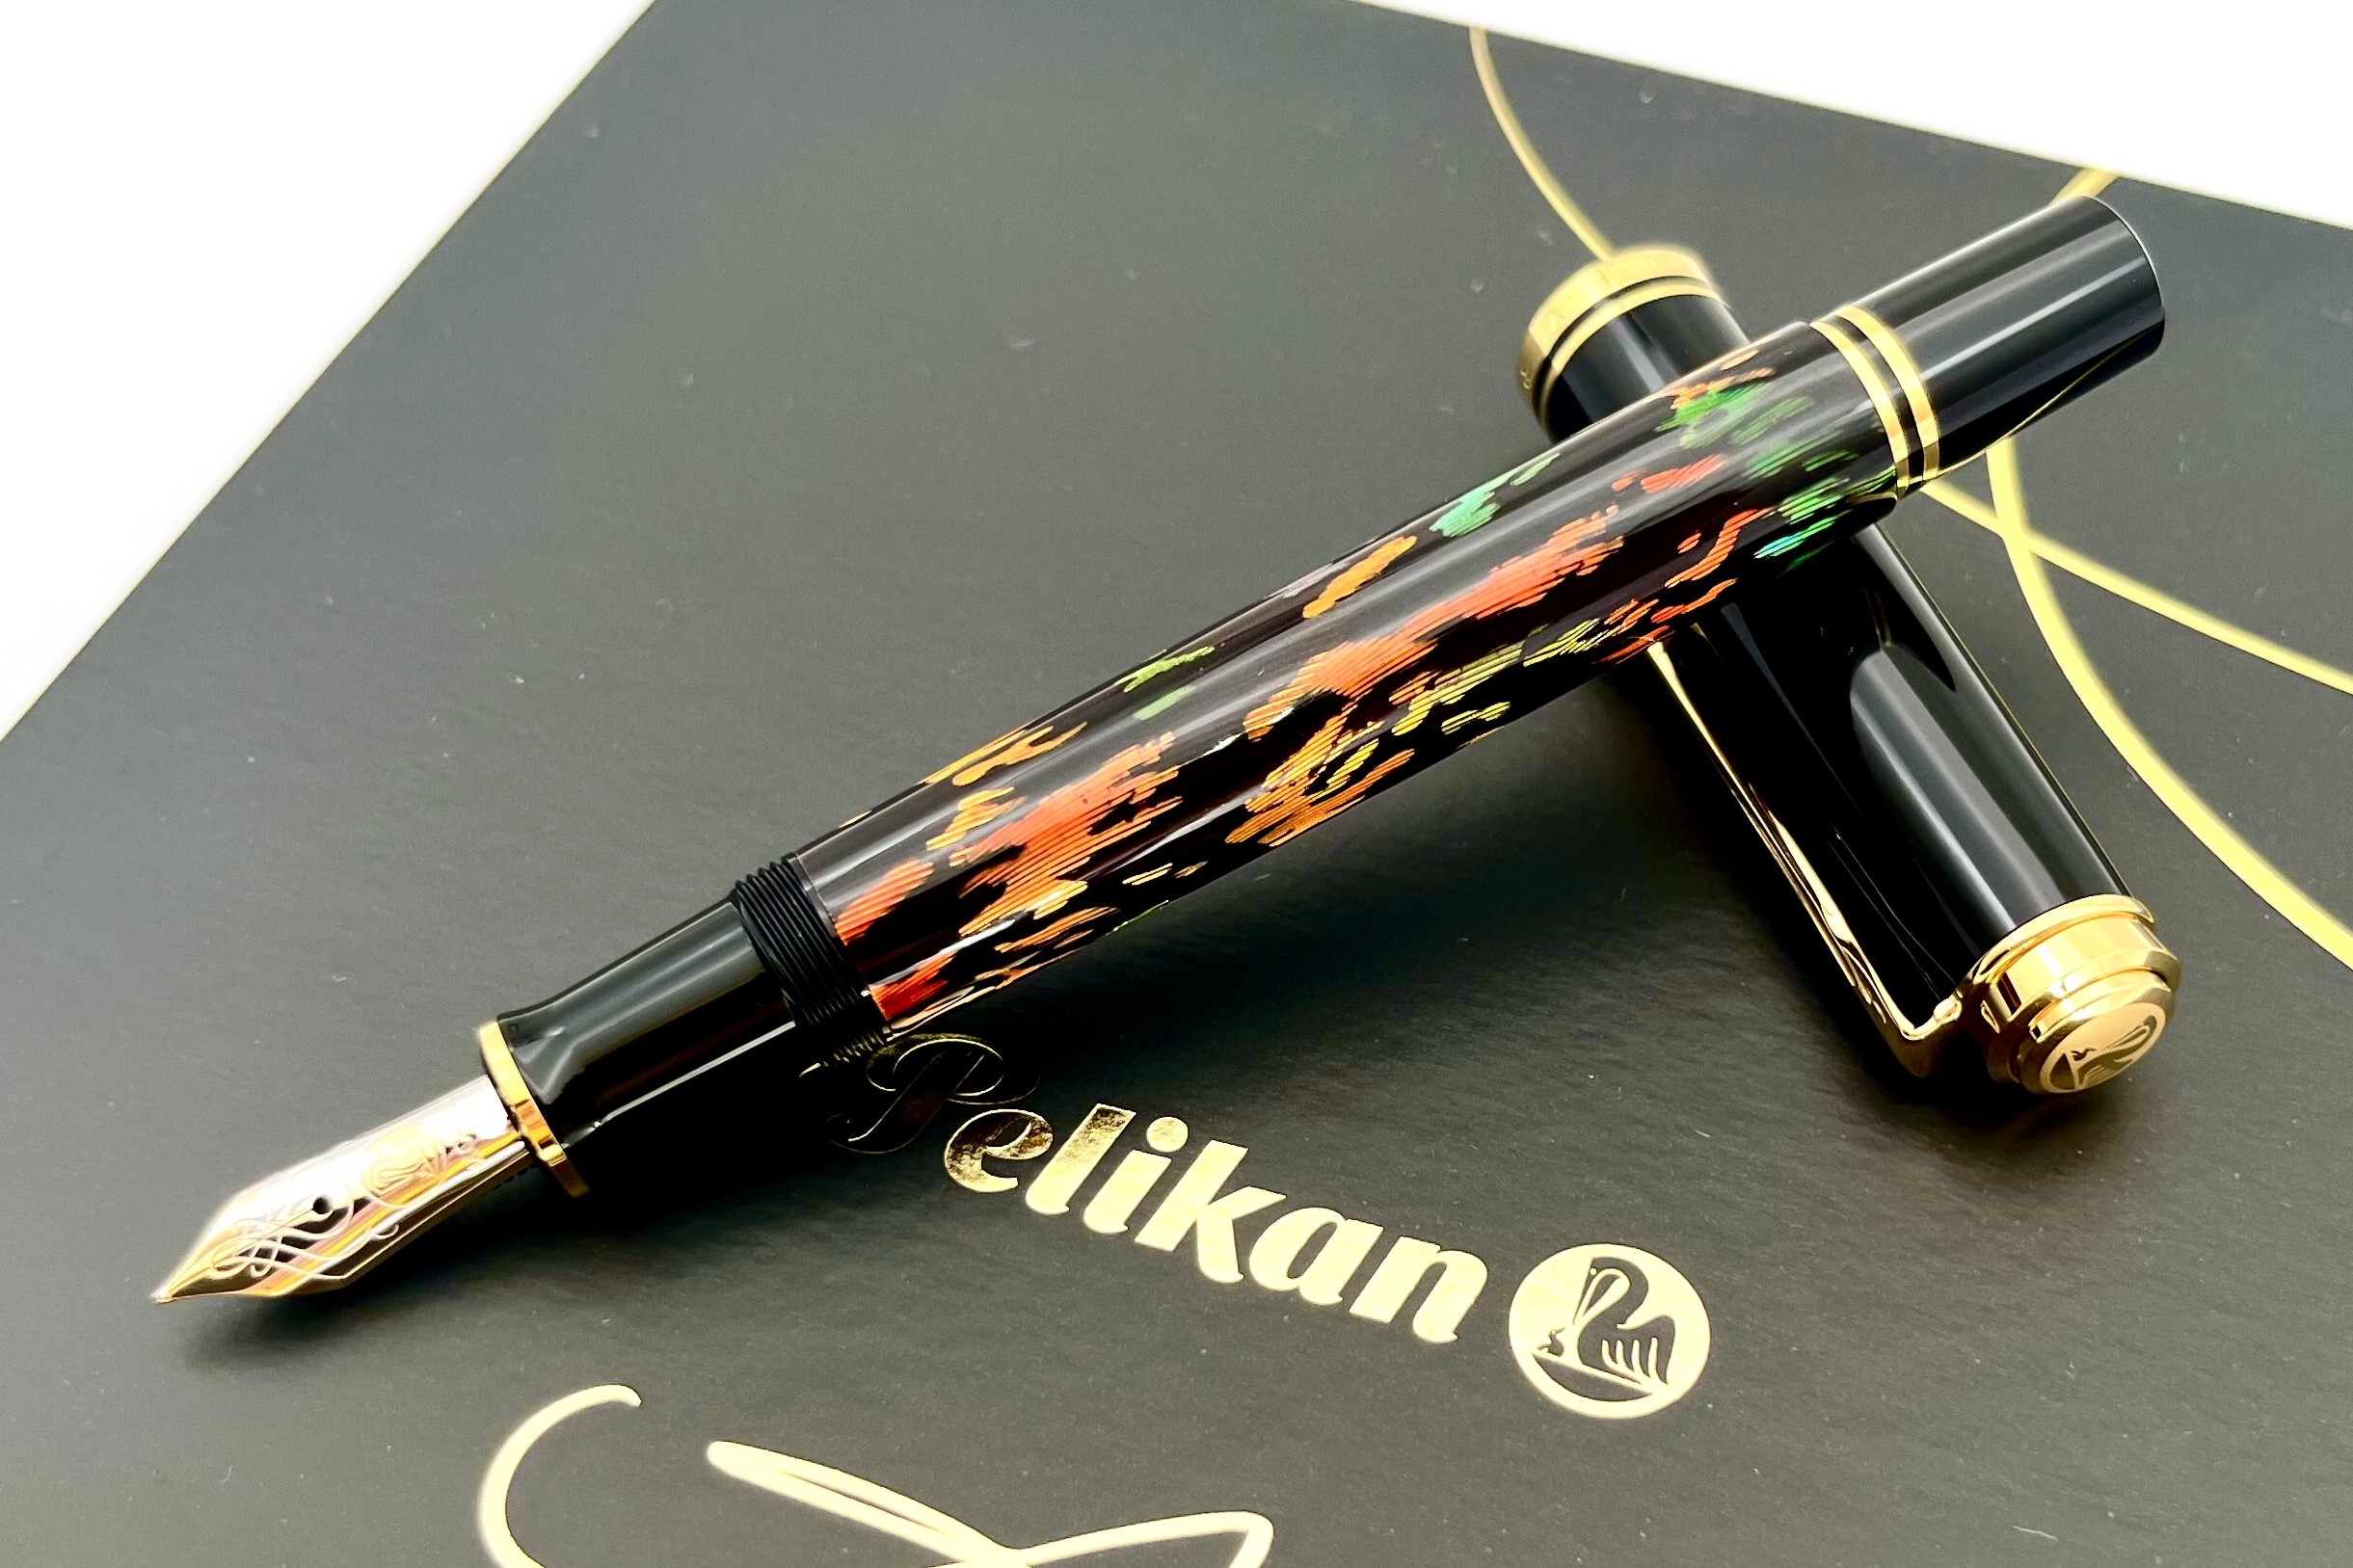 PelikanM600ArtCollectionGlaucoCambonFP_A